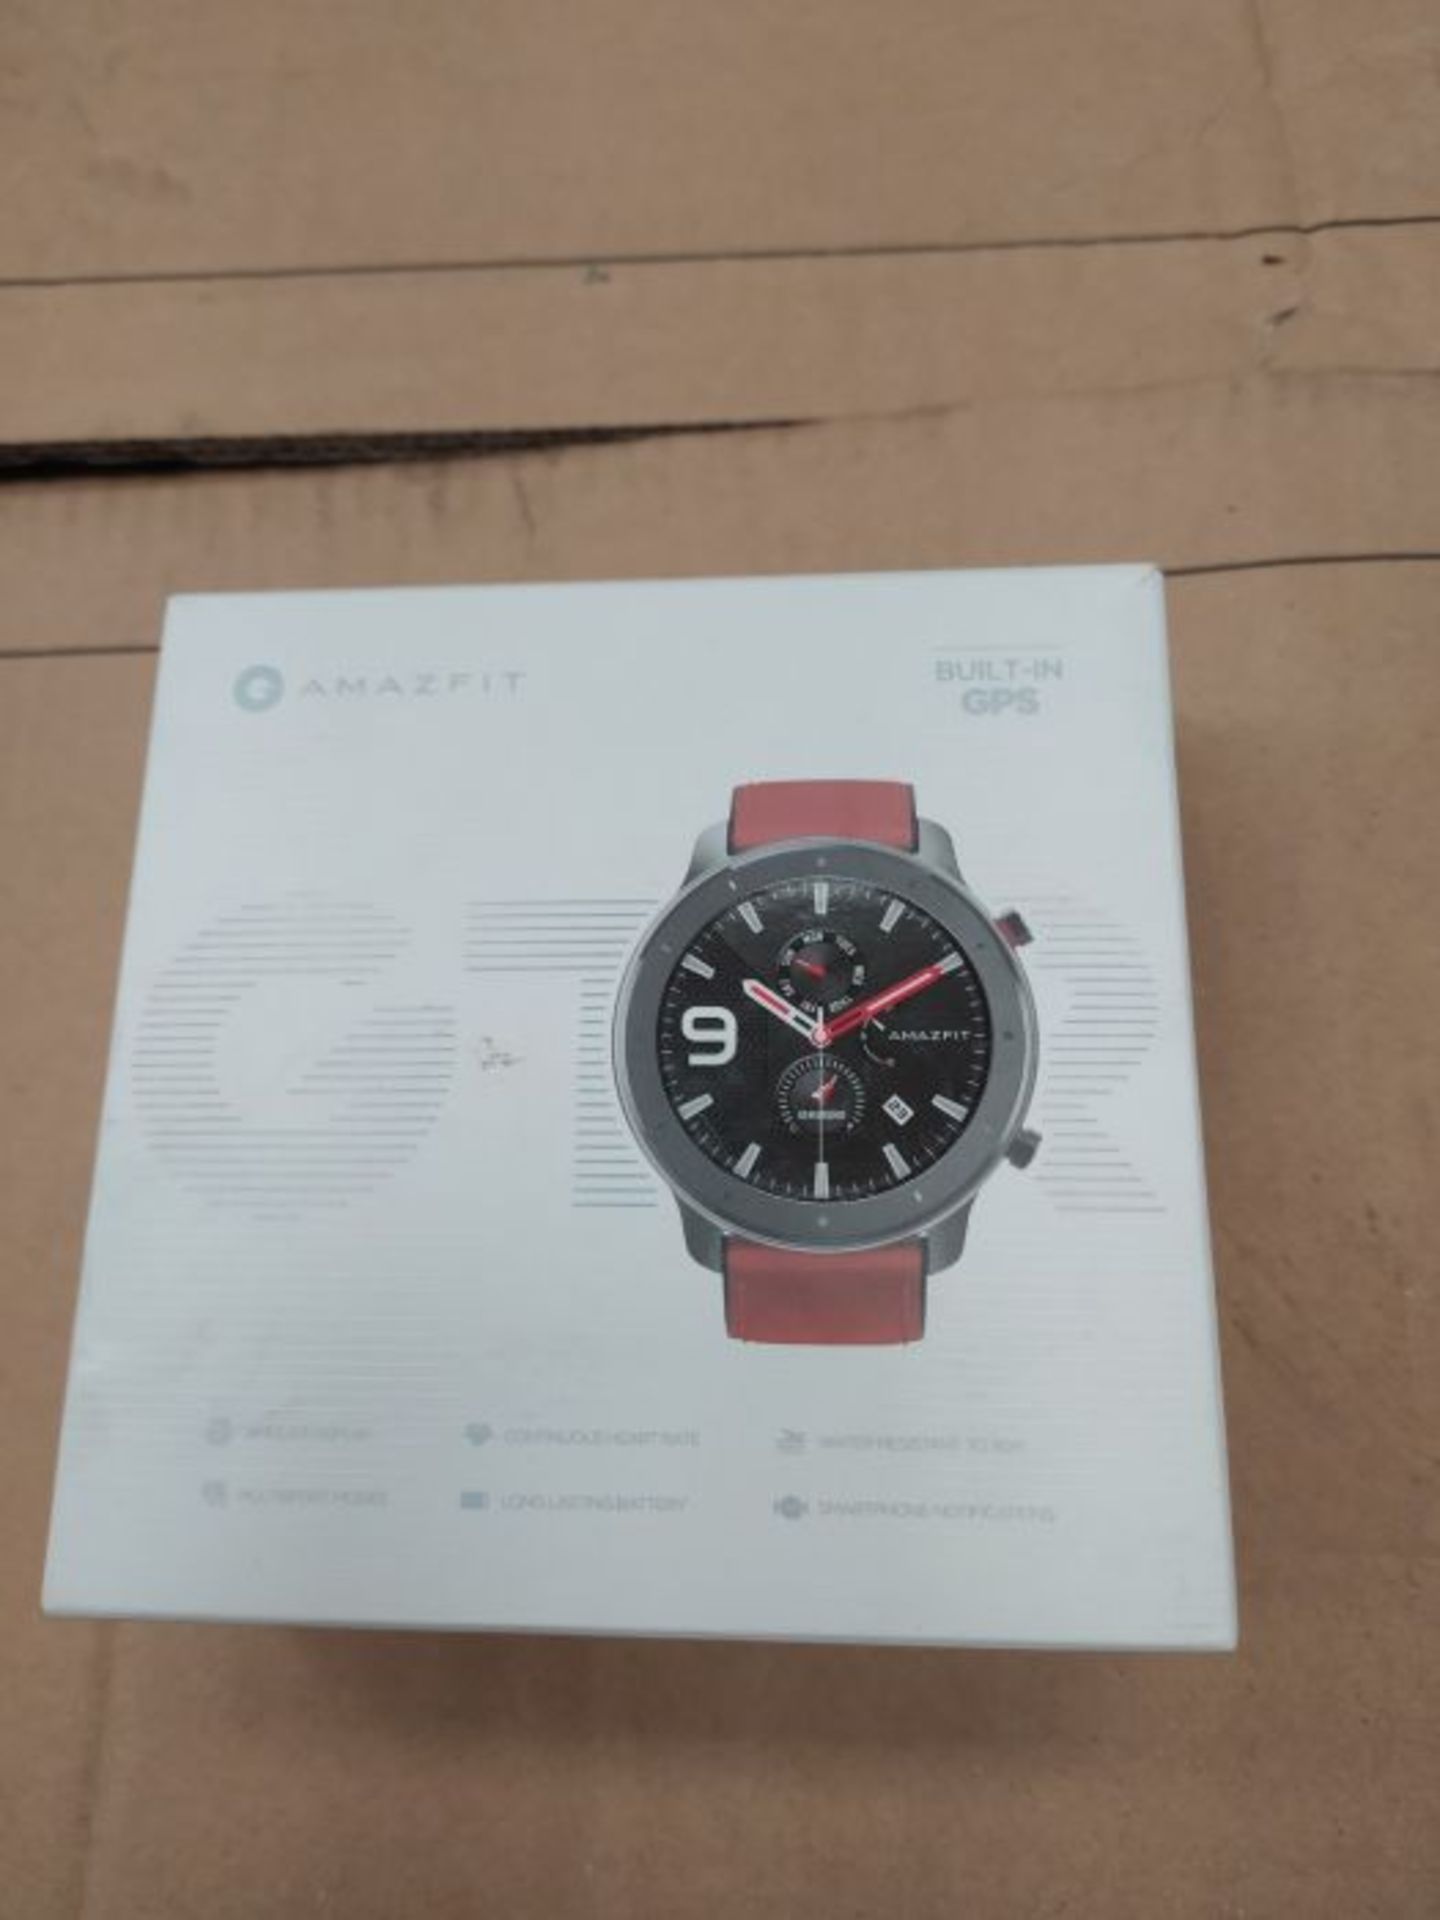 RRP £99.00 Amazfit GTR 47mm Smartwatch Sports Watch 5 ATM Waterproof with GPS, Pedometer, Sleep M - Image 2 of 3